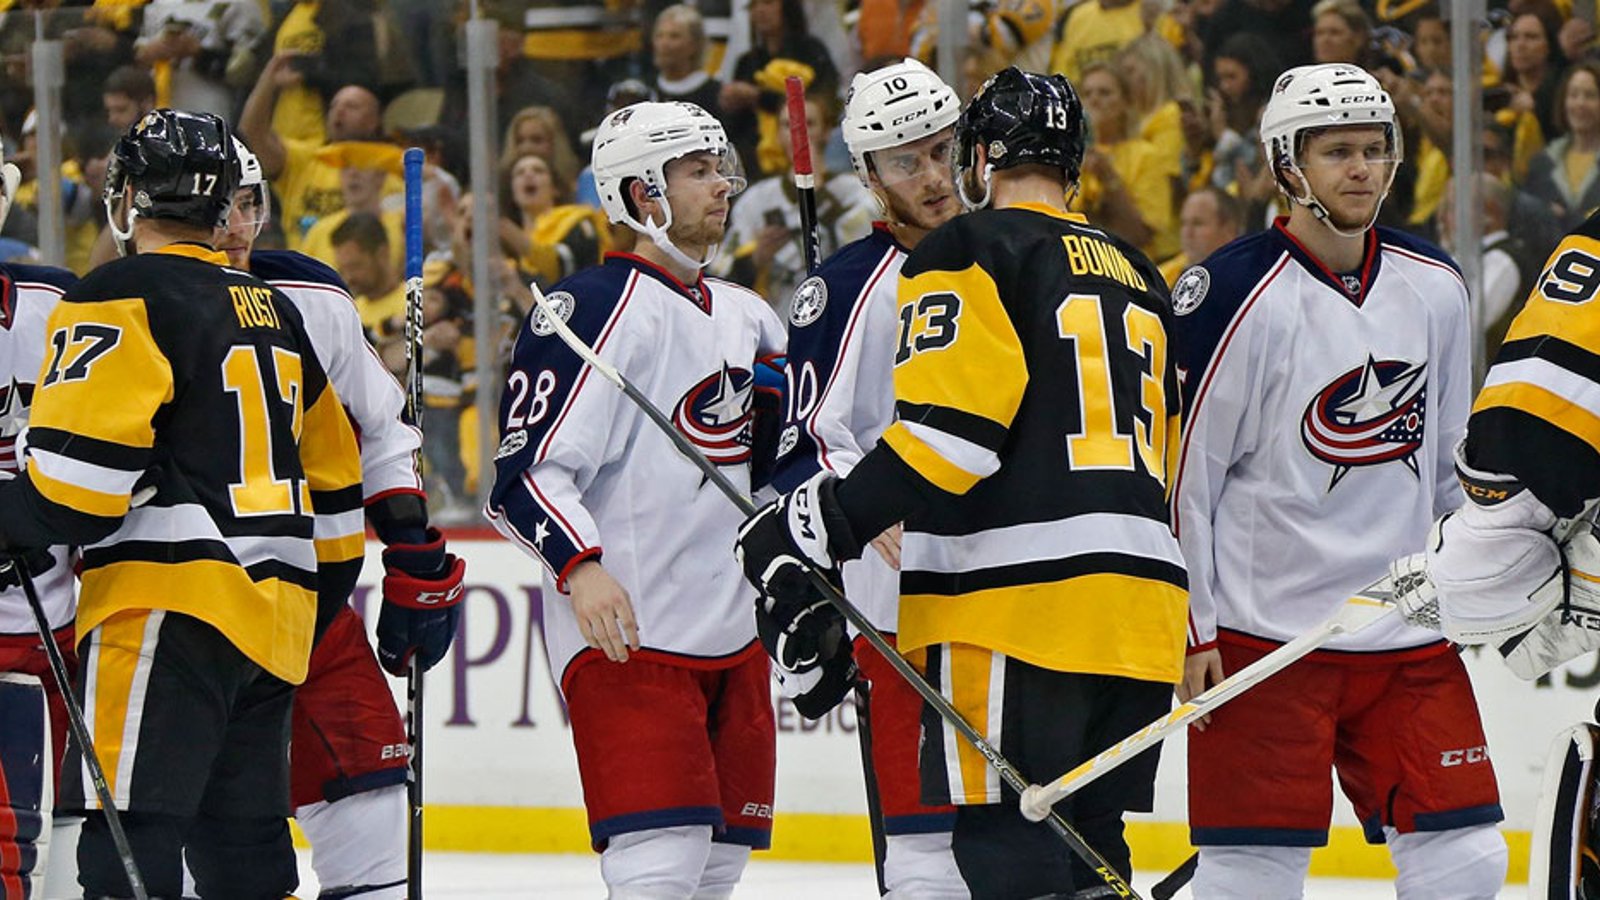 Your call: Will the Blue Jackets make the playoffs in consecutive years for the first time?